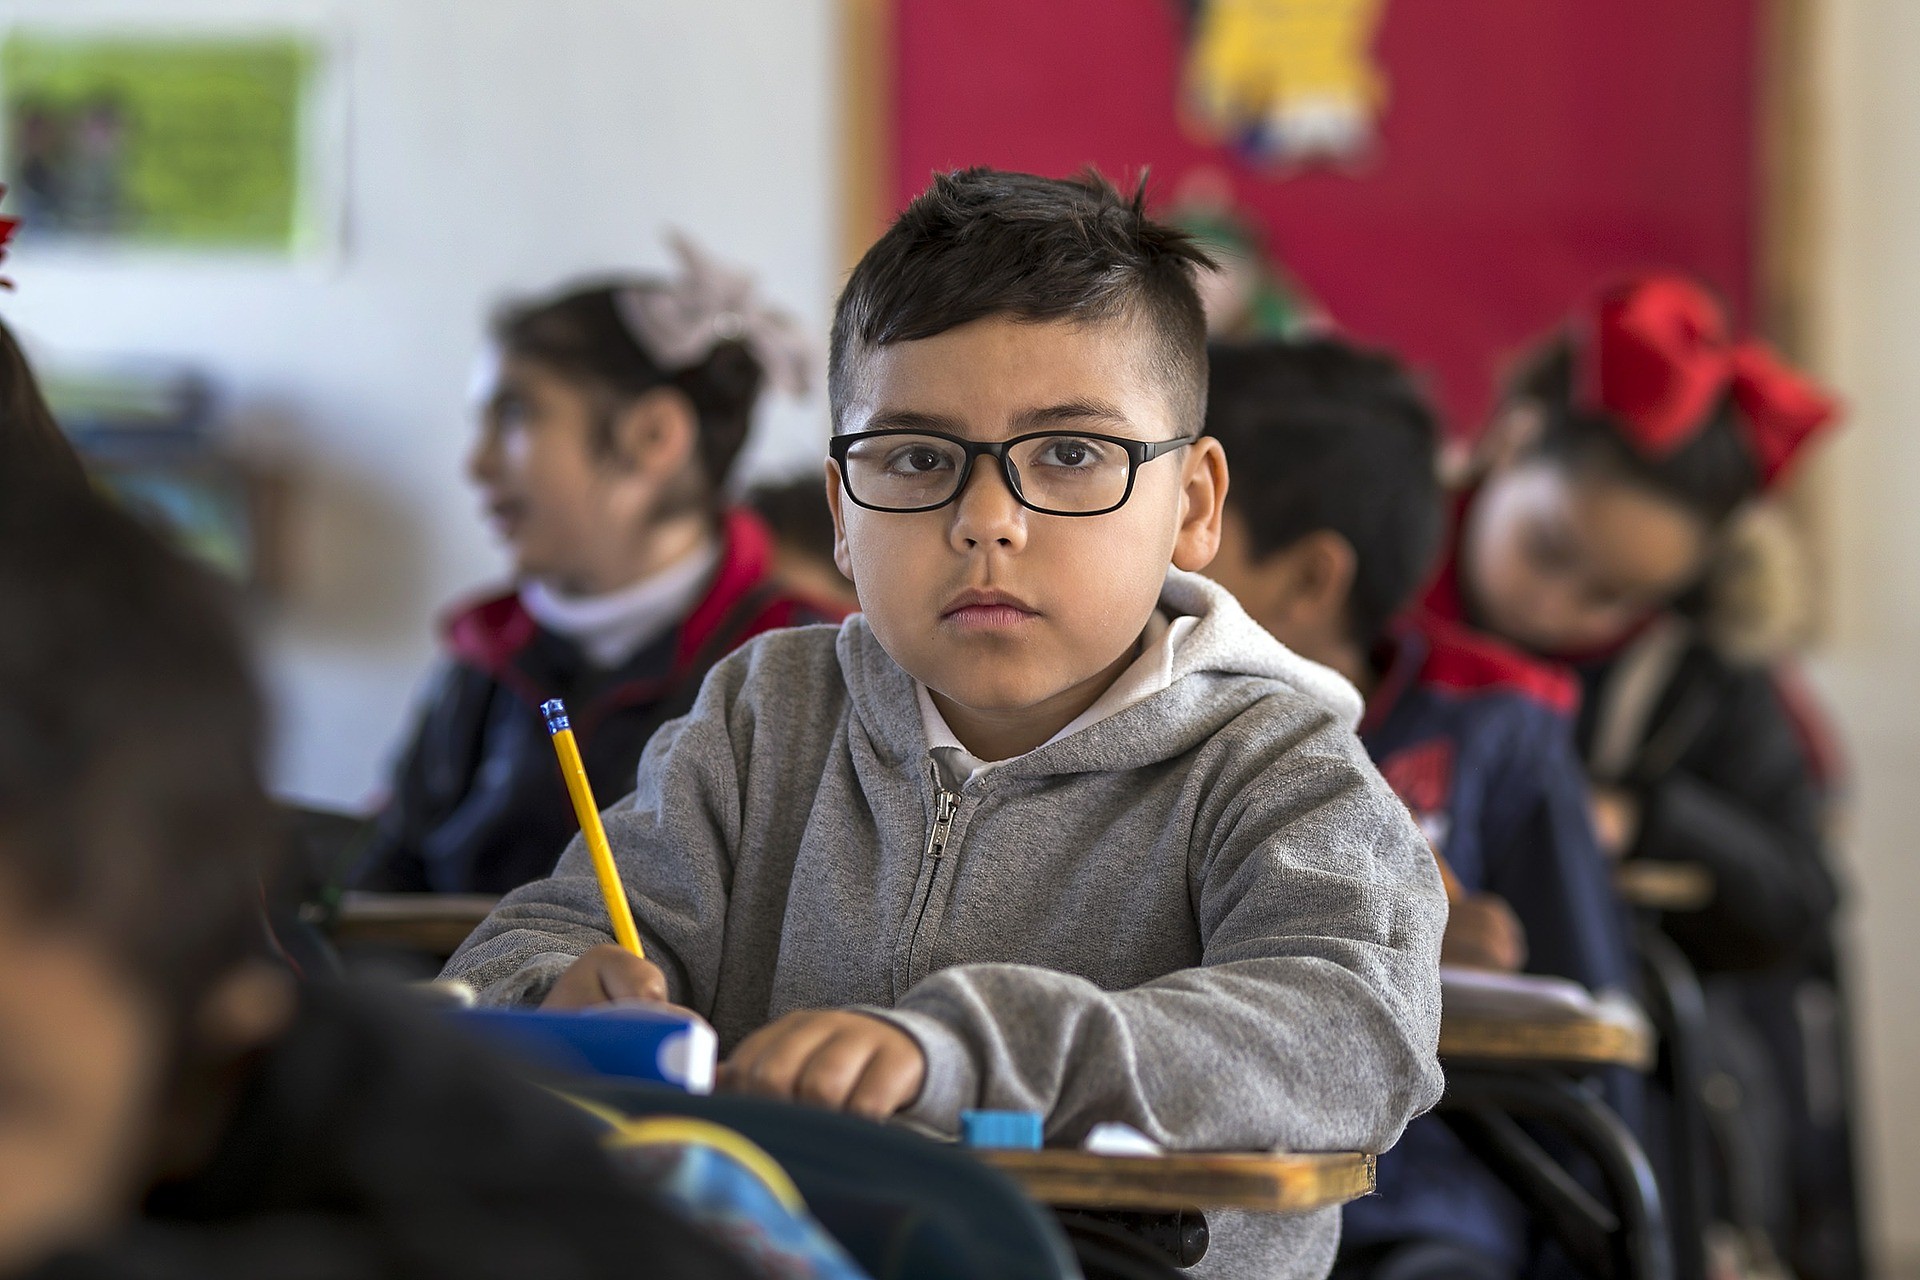 Elementary aged Latino student seated in a classroom surrounded by his peers with a pencil in hand